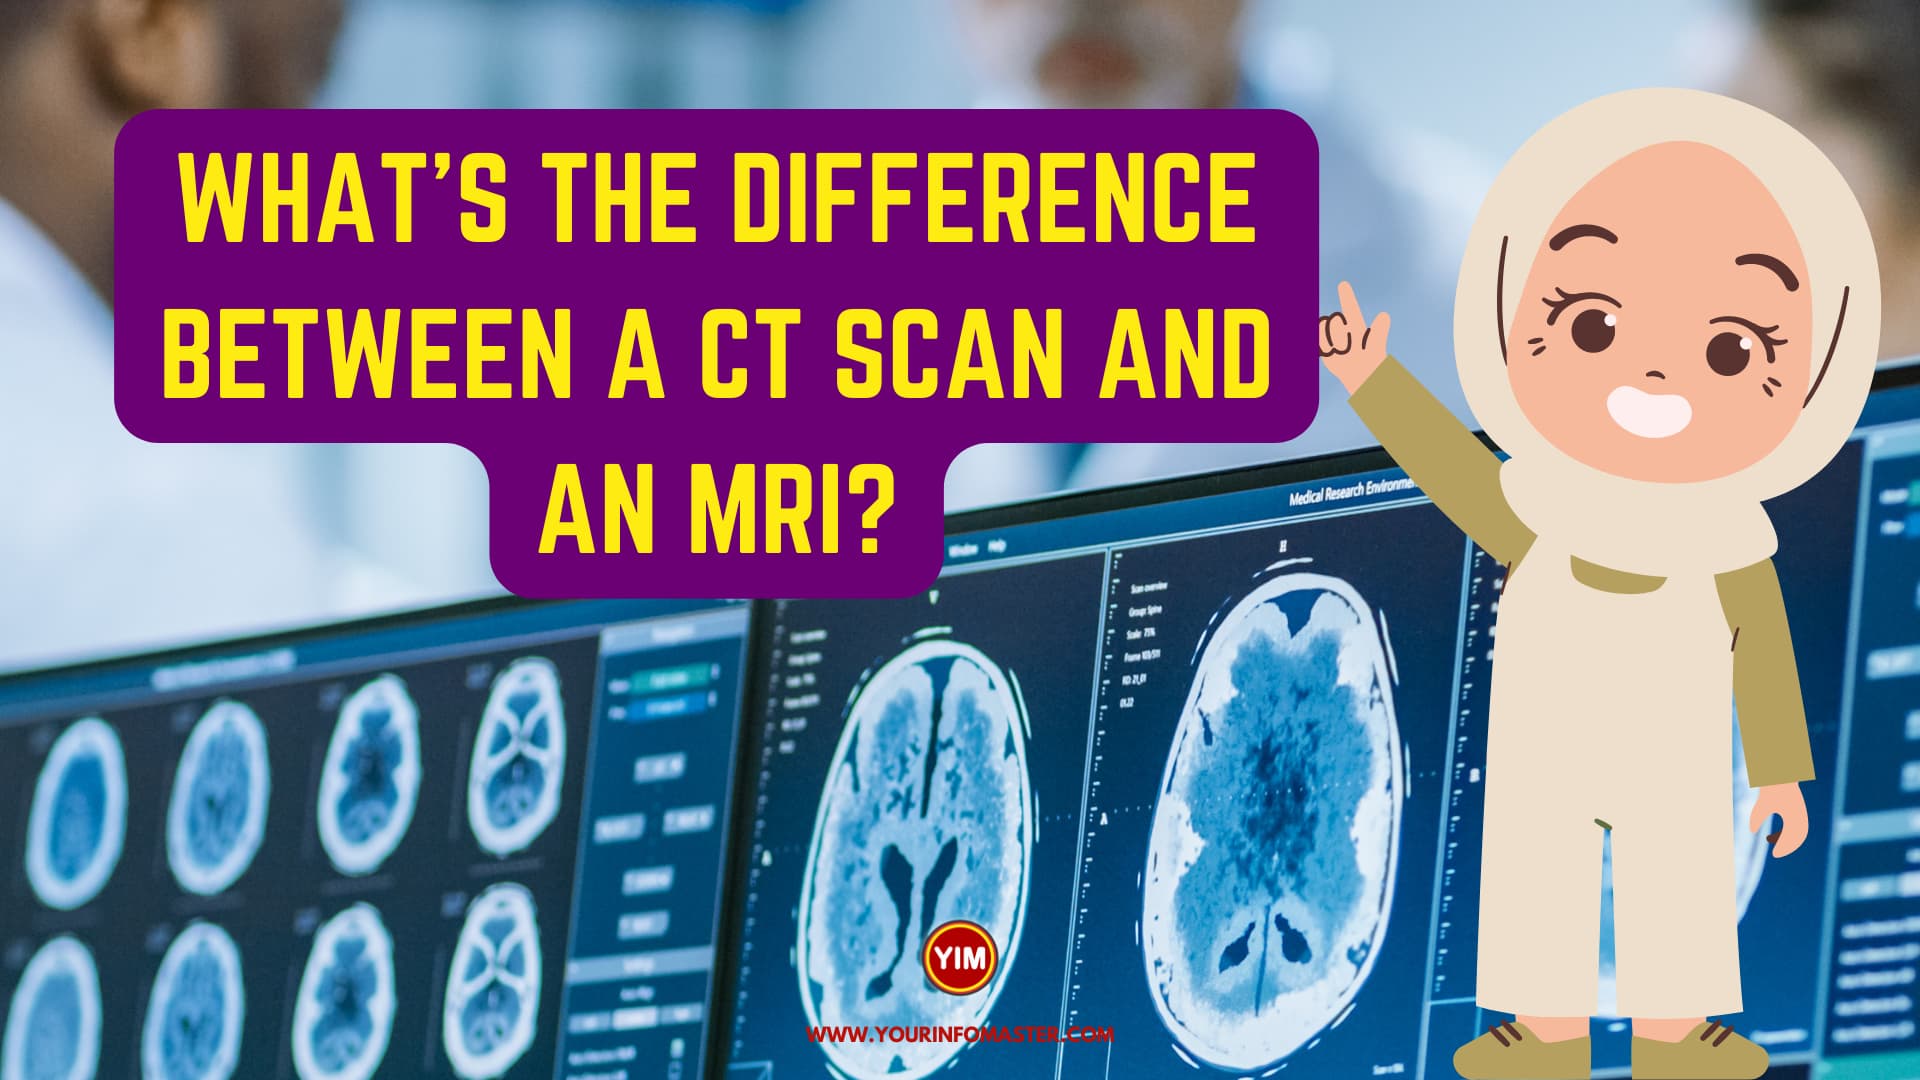 What is the difference between a CT Scan and an MRI